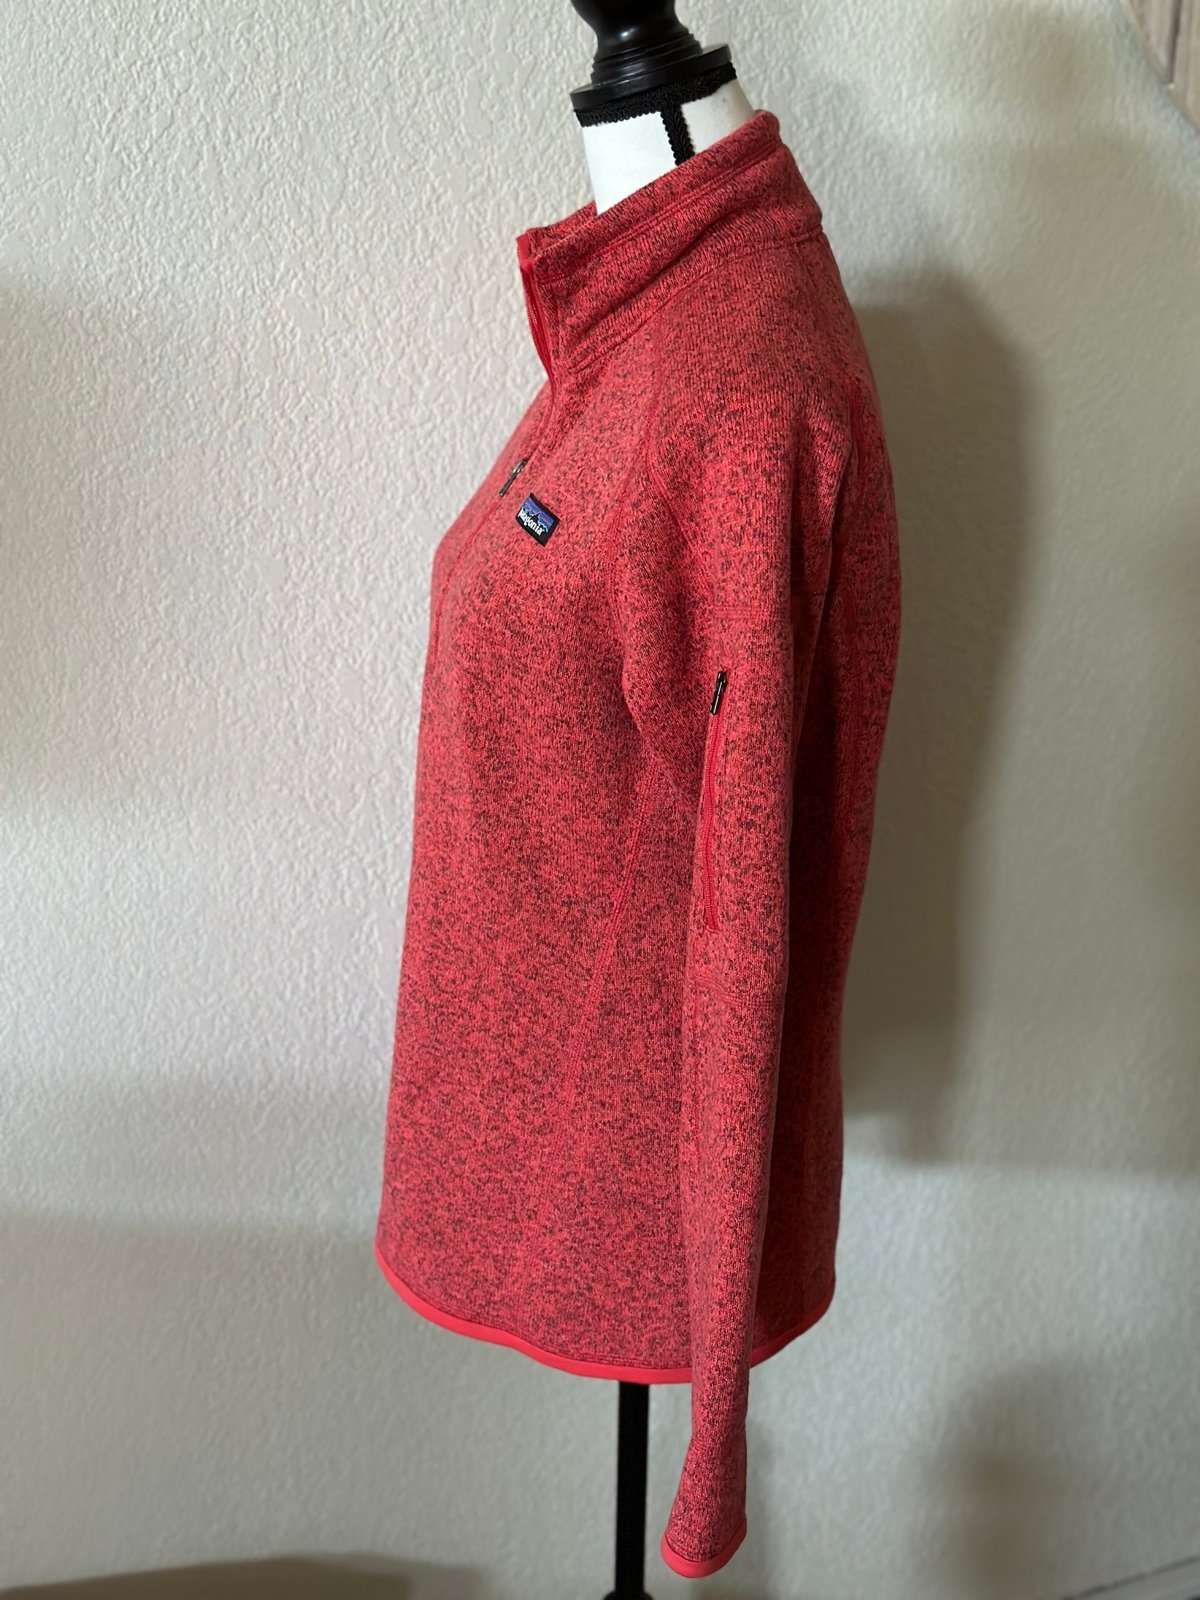 Stylish Patagonia Better Sweater 1/4” Zip Pullover L0Z7uqz0P on sale